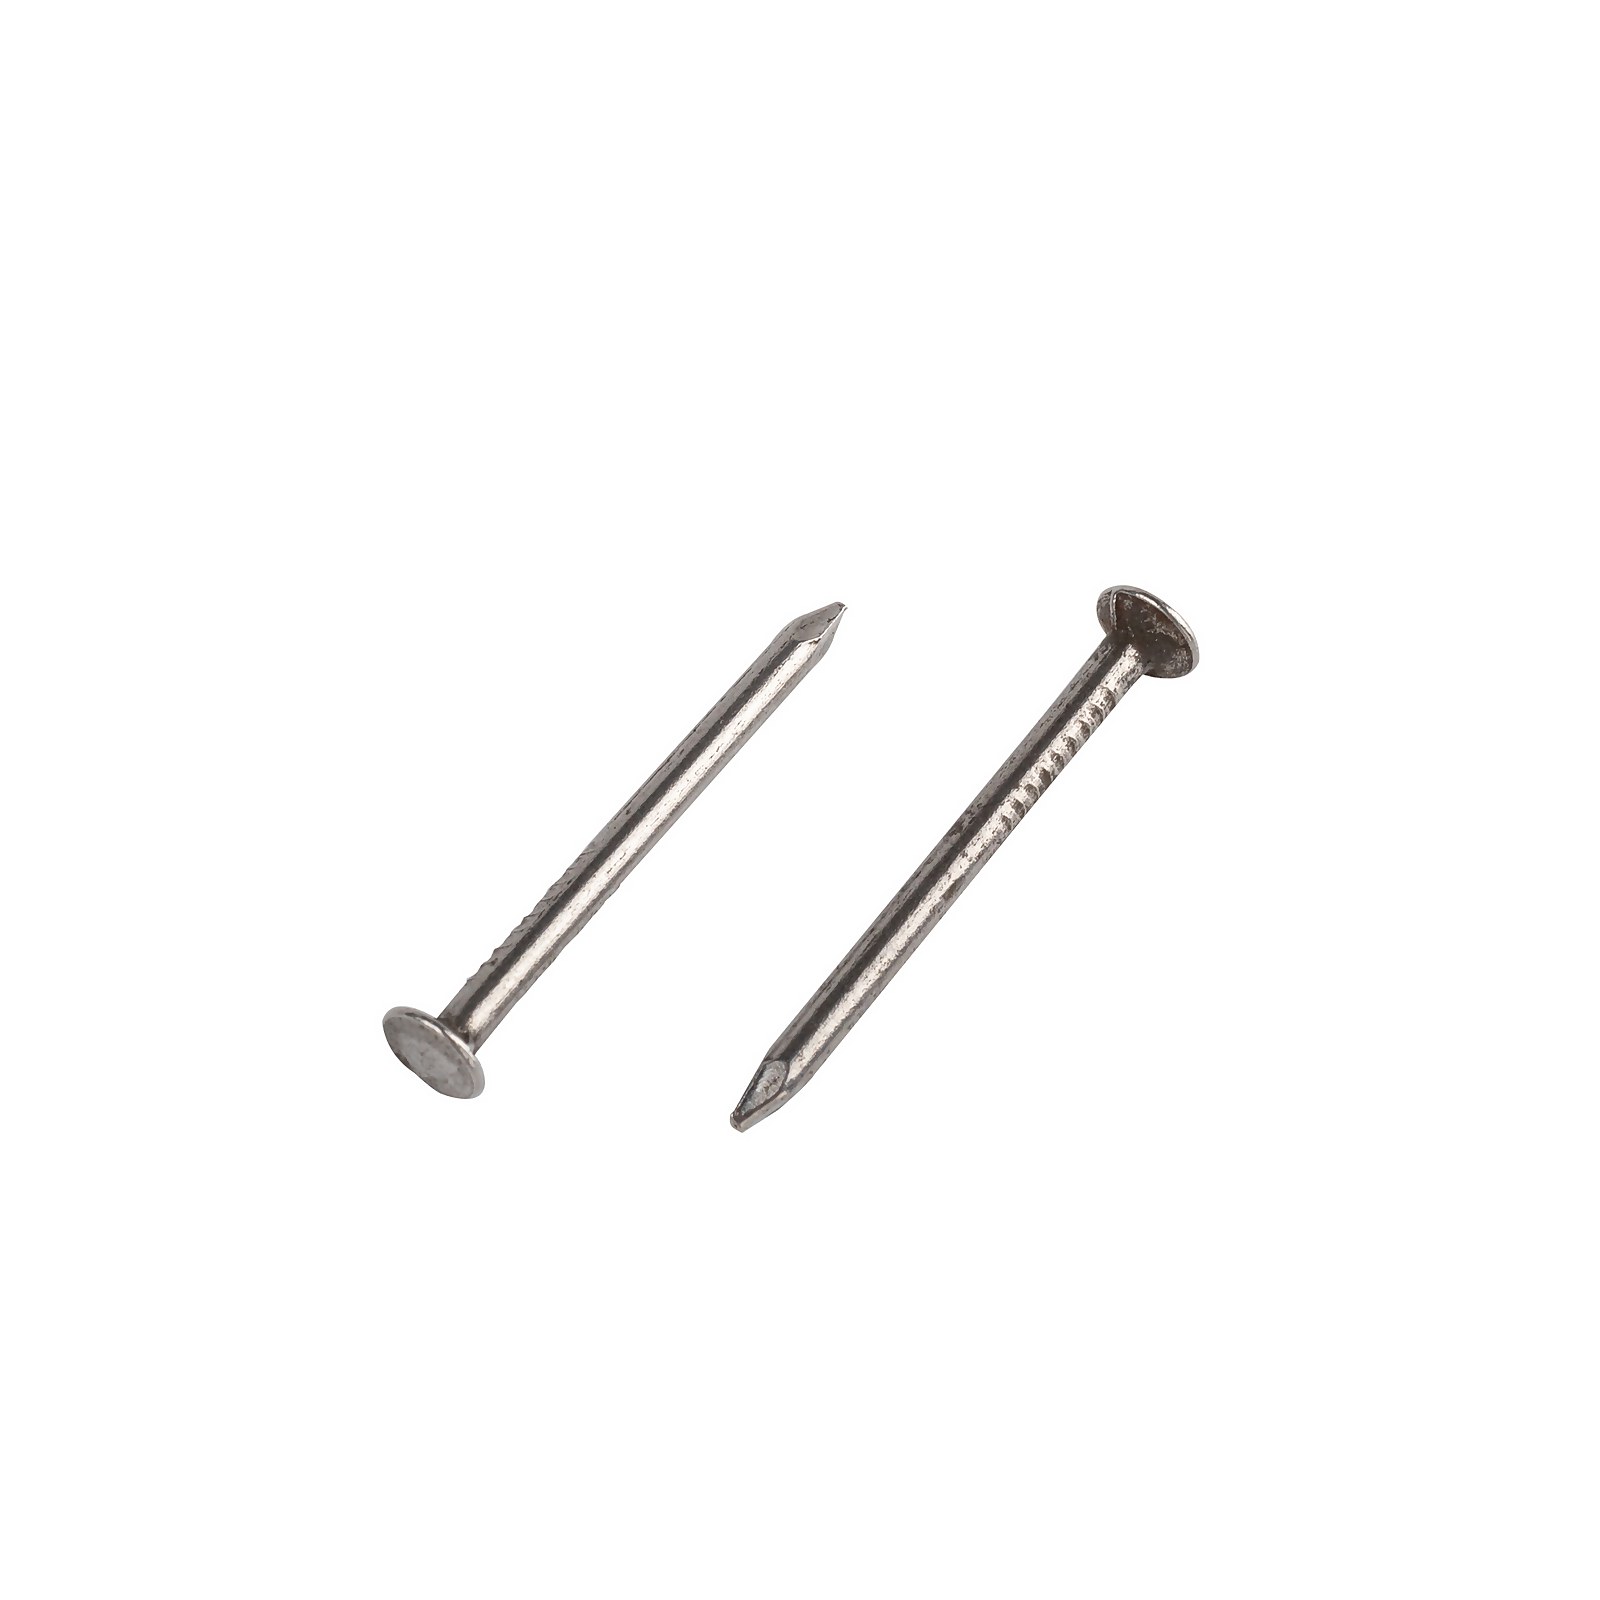 Photo of Homebase Bright Round Wire Nails 25mm - 100g